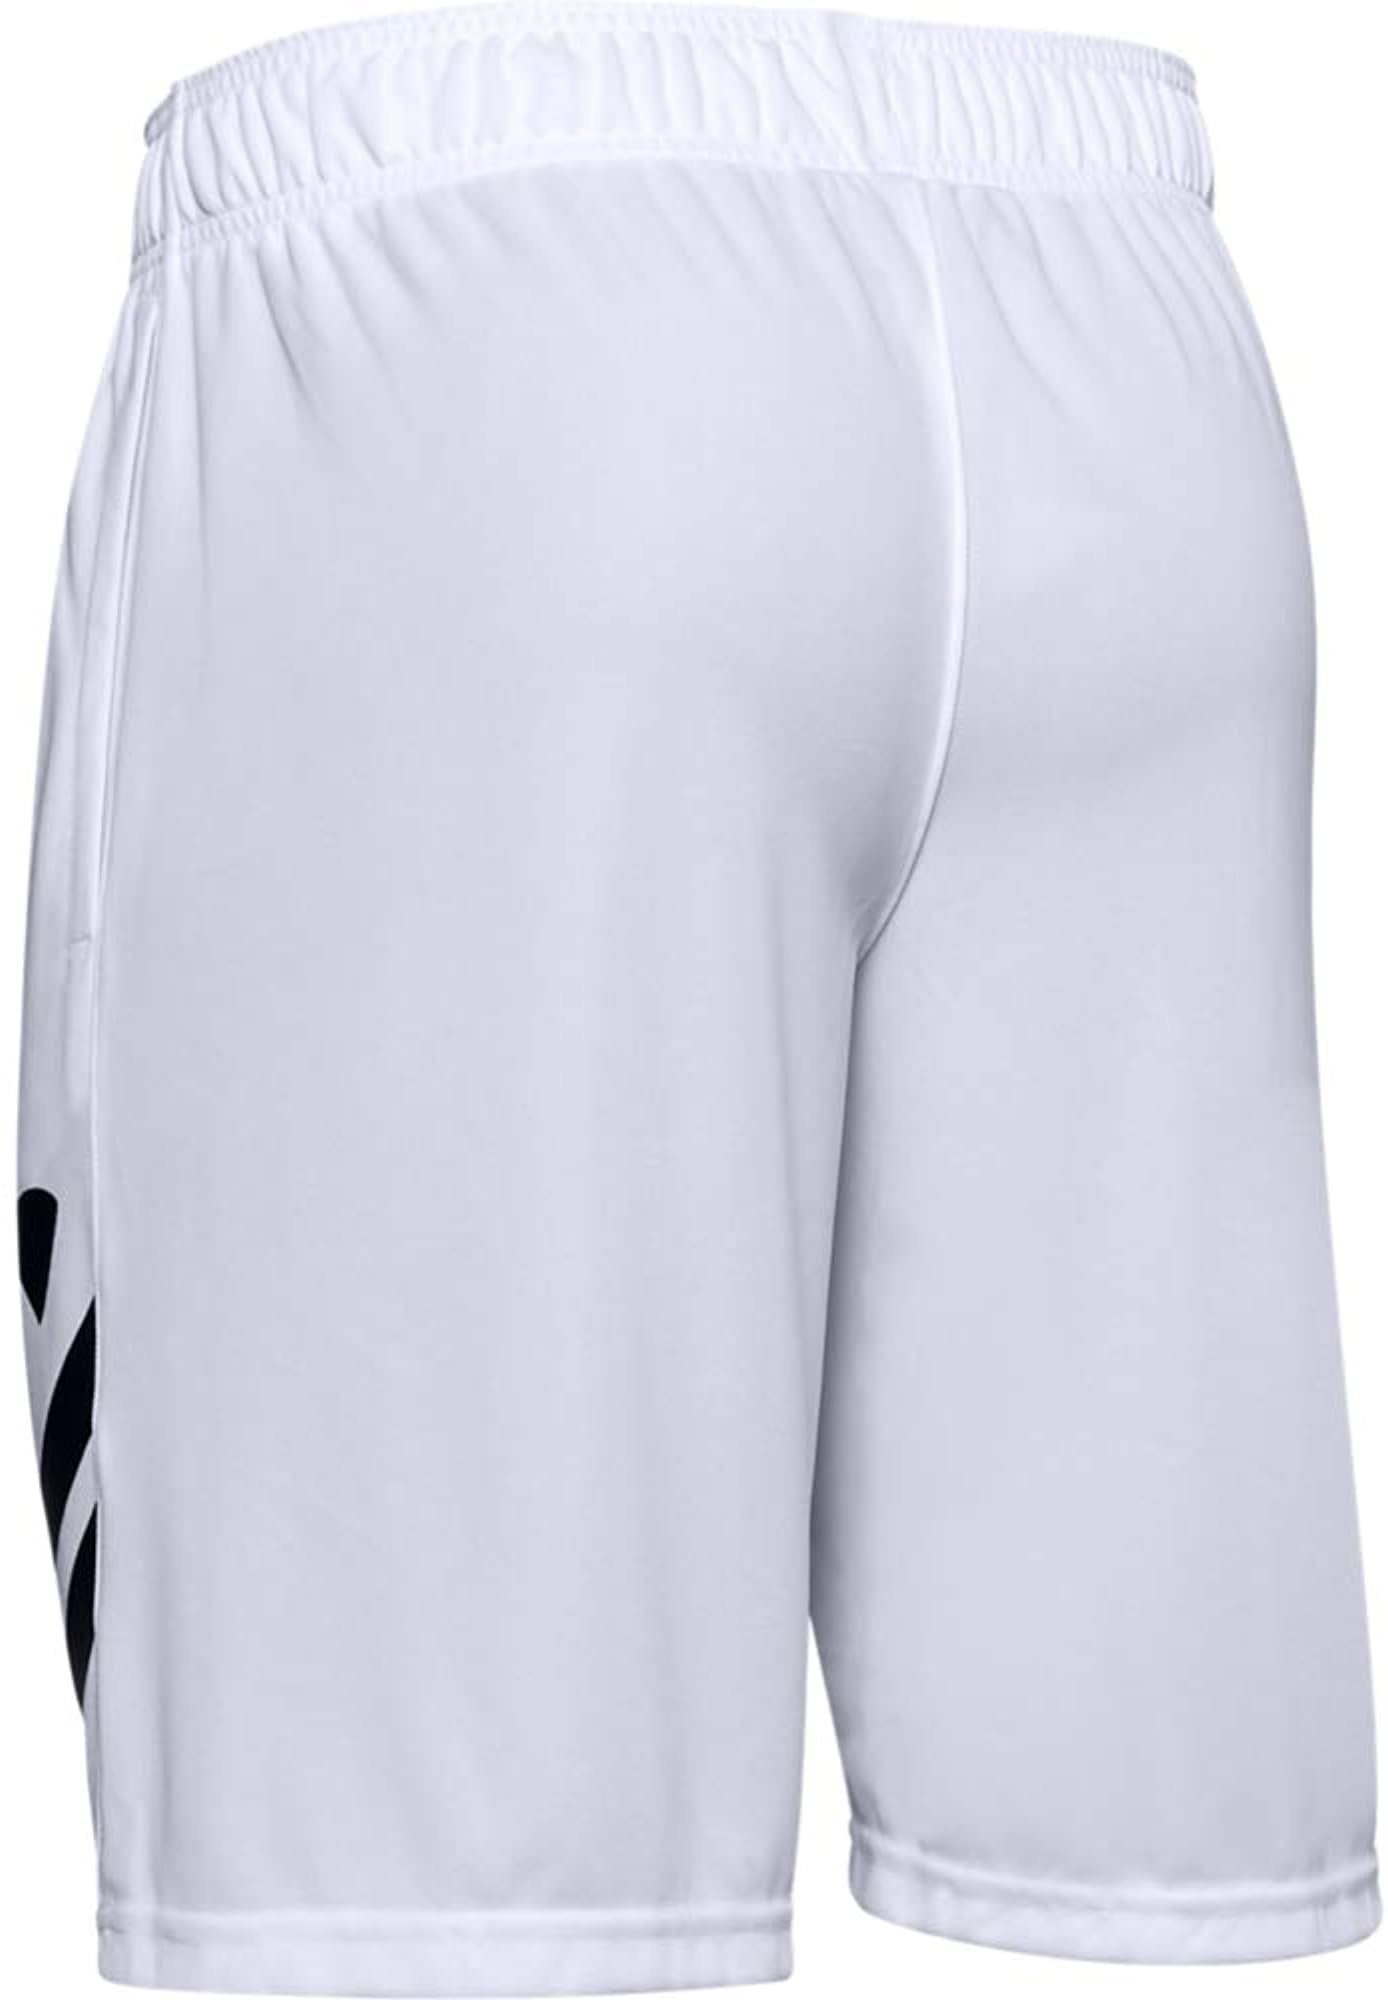 Under Armour Mens Baseline 10-inch Shorts 